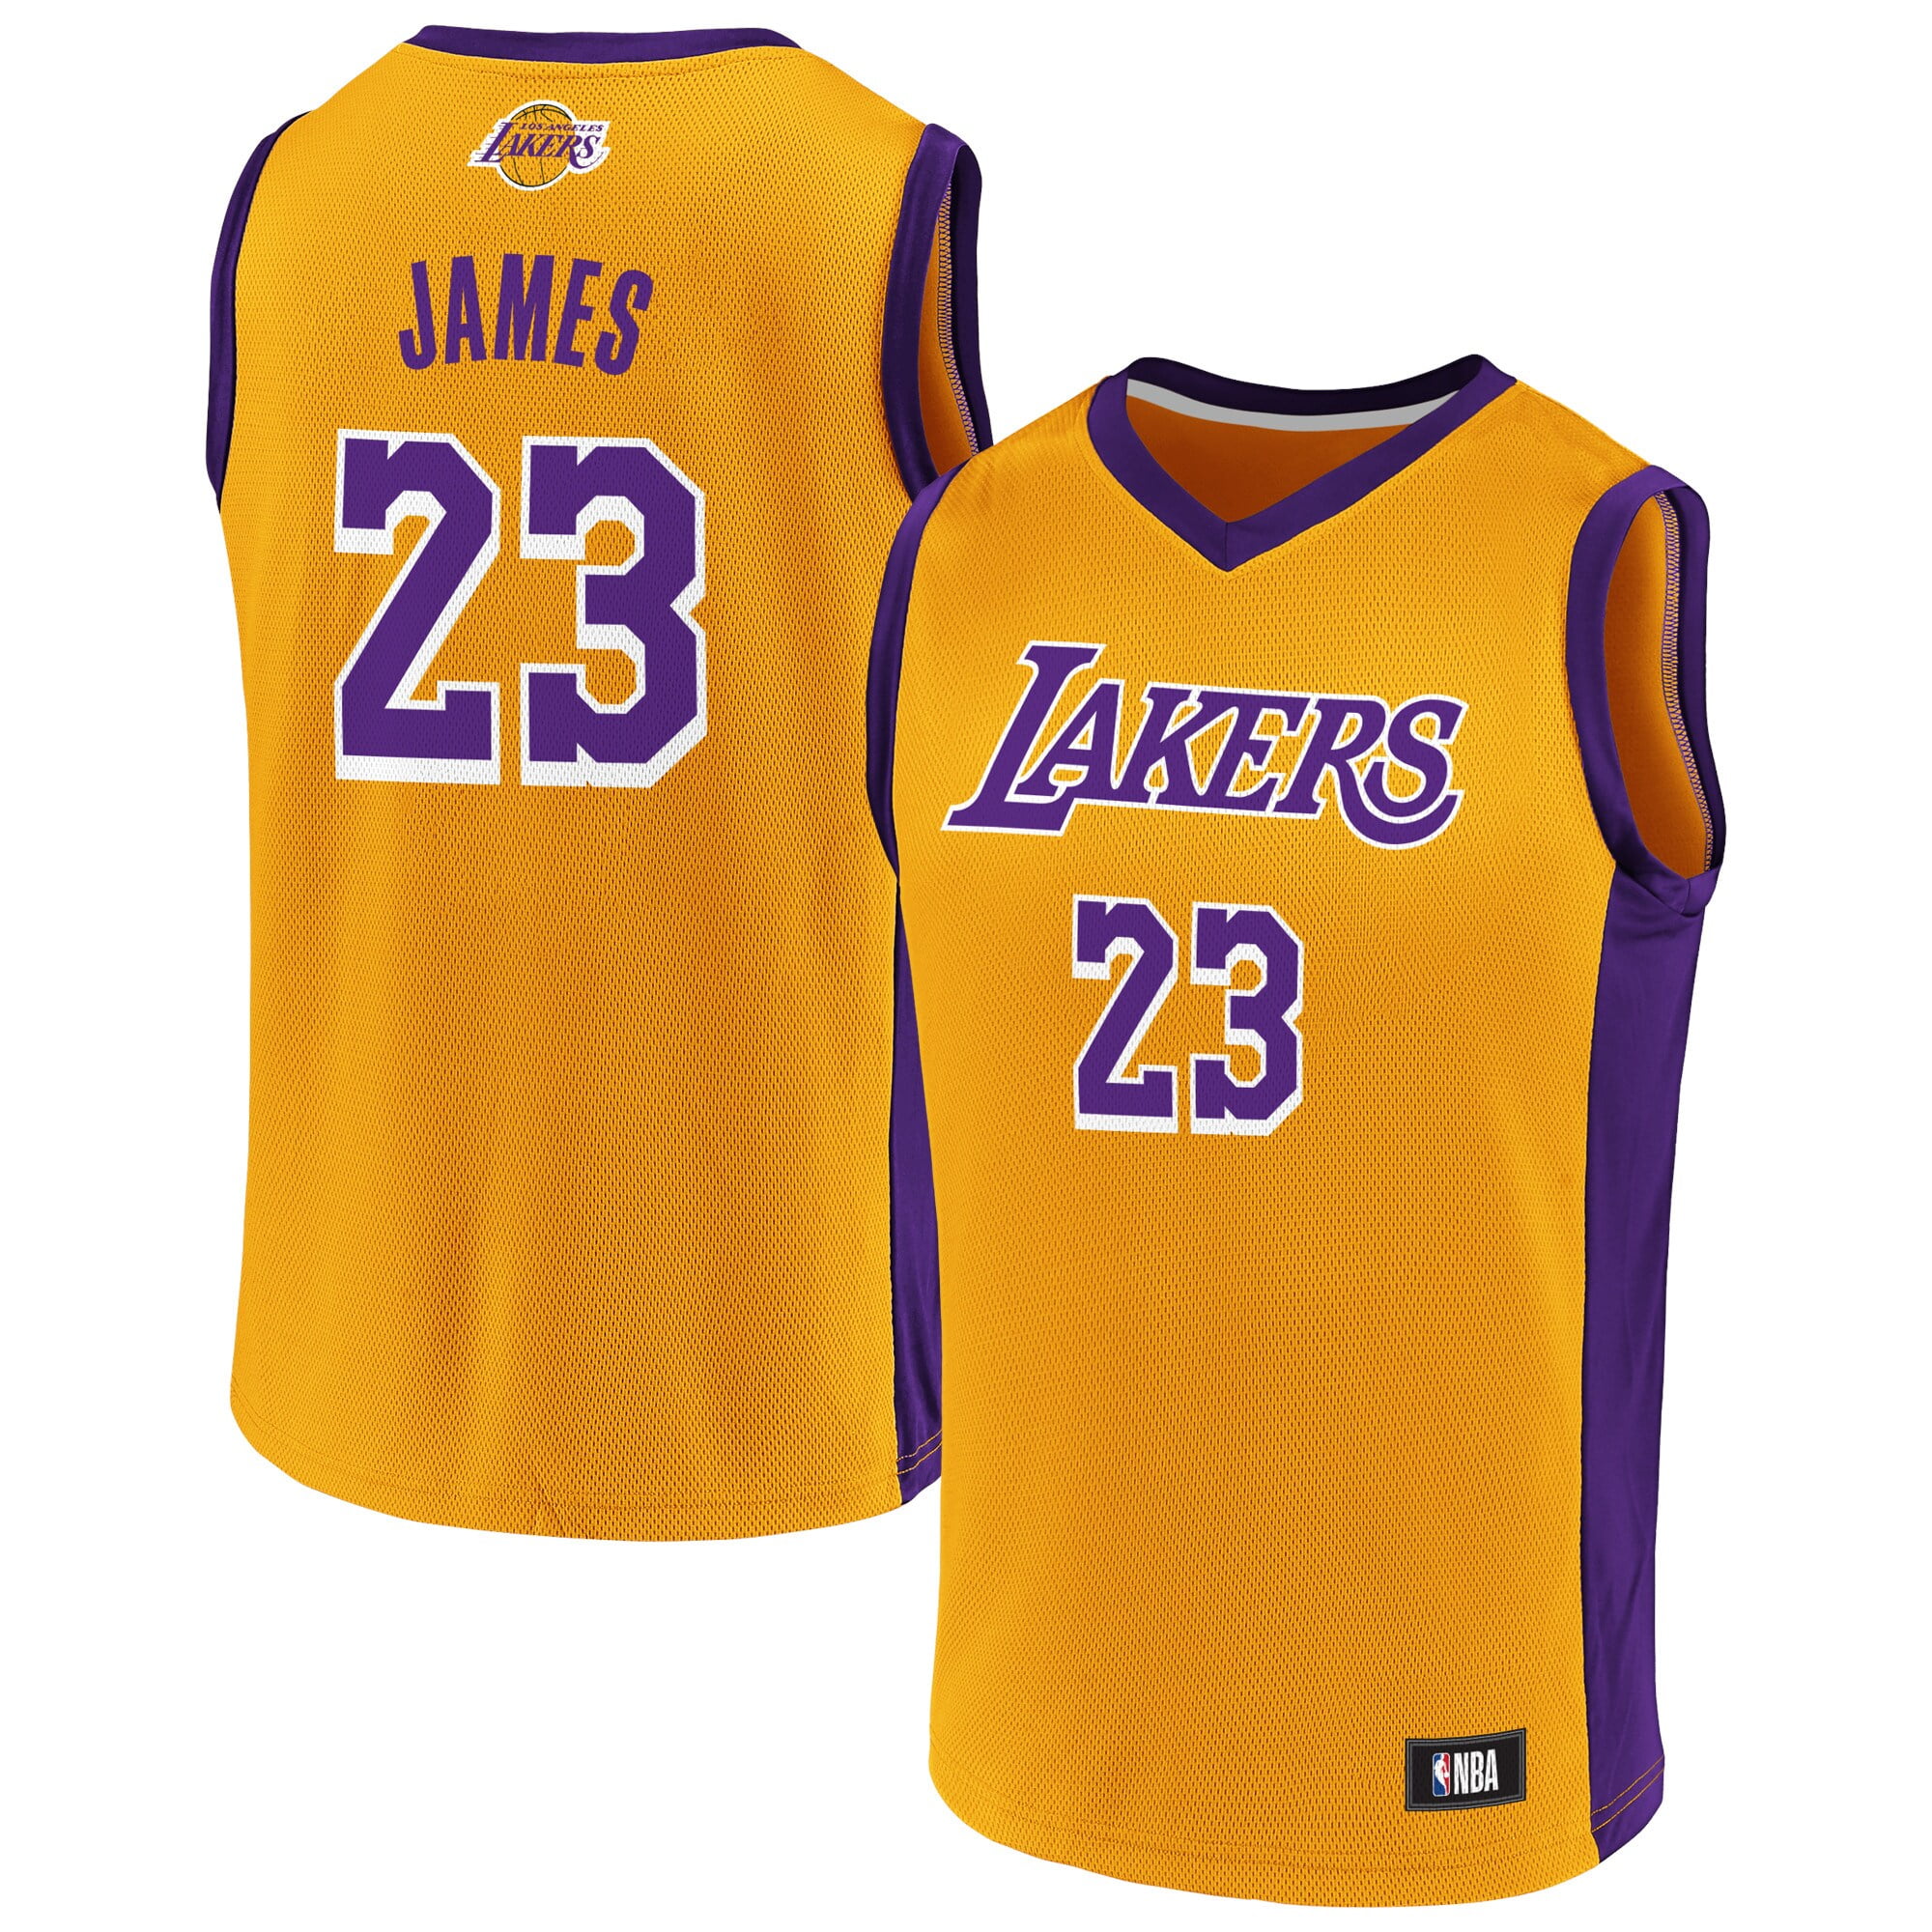 james youth jersey